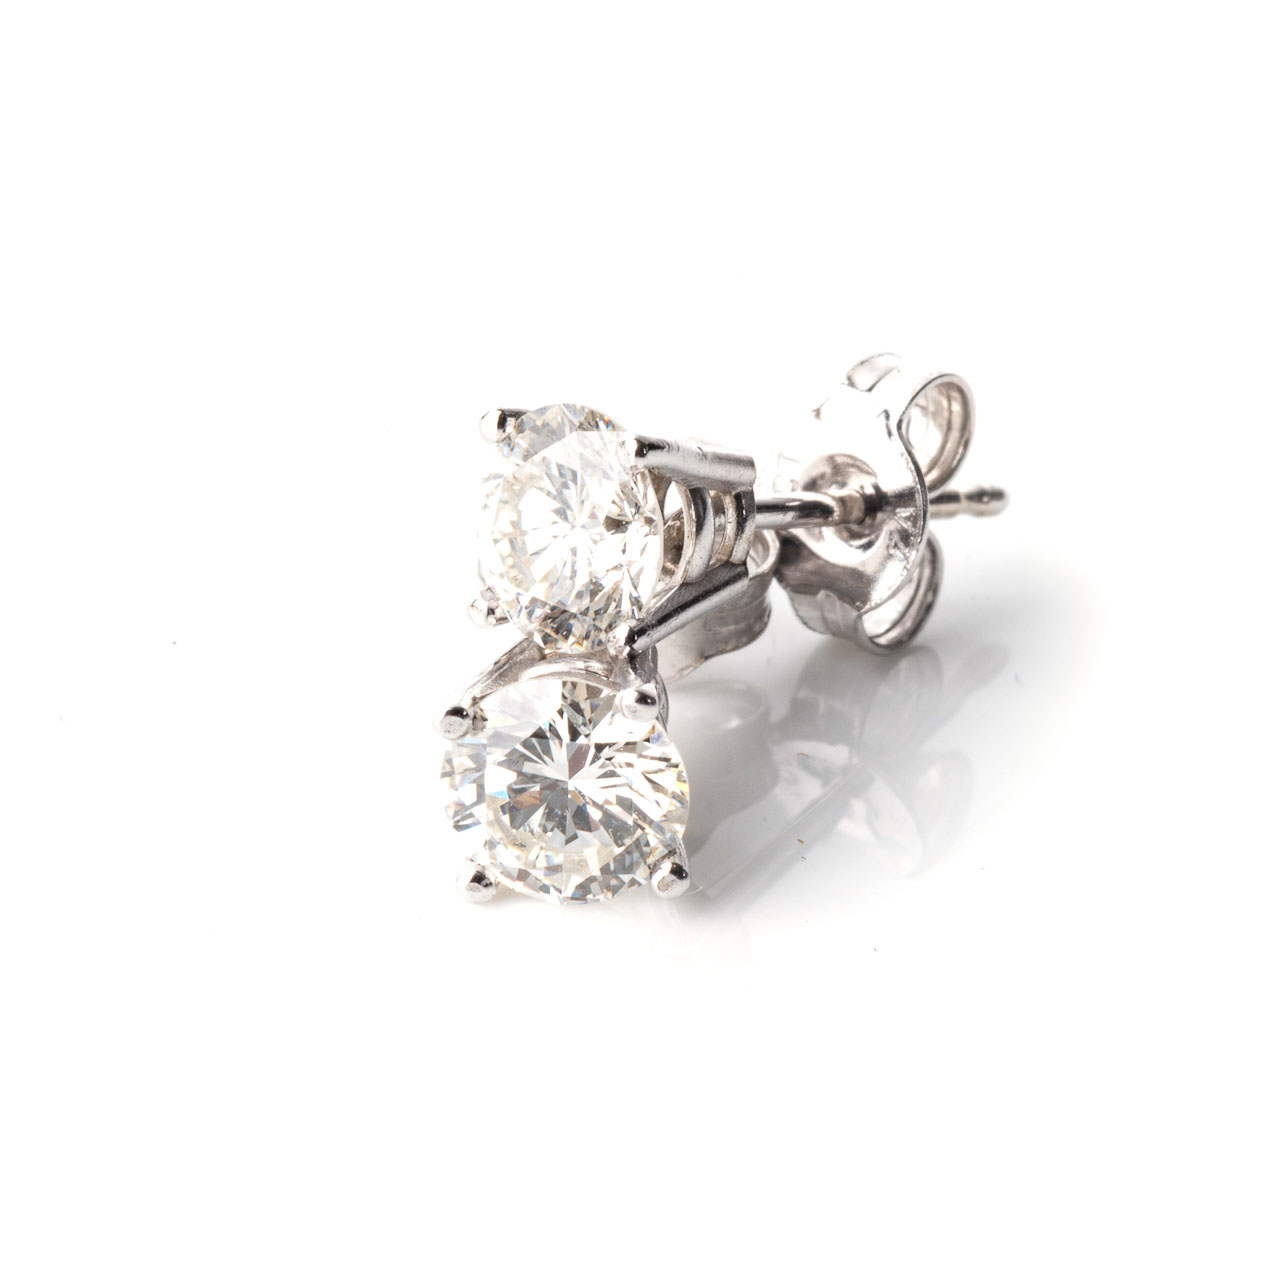 A PAIR OF DIAMOND STUDS Each claw-set to the centre with a round, brilliant-cut diamond, weighing